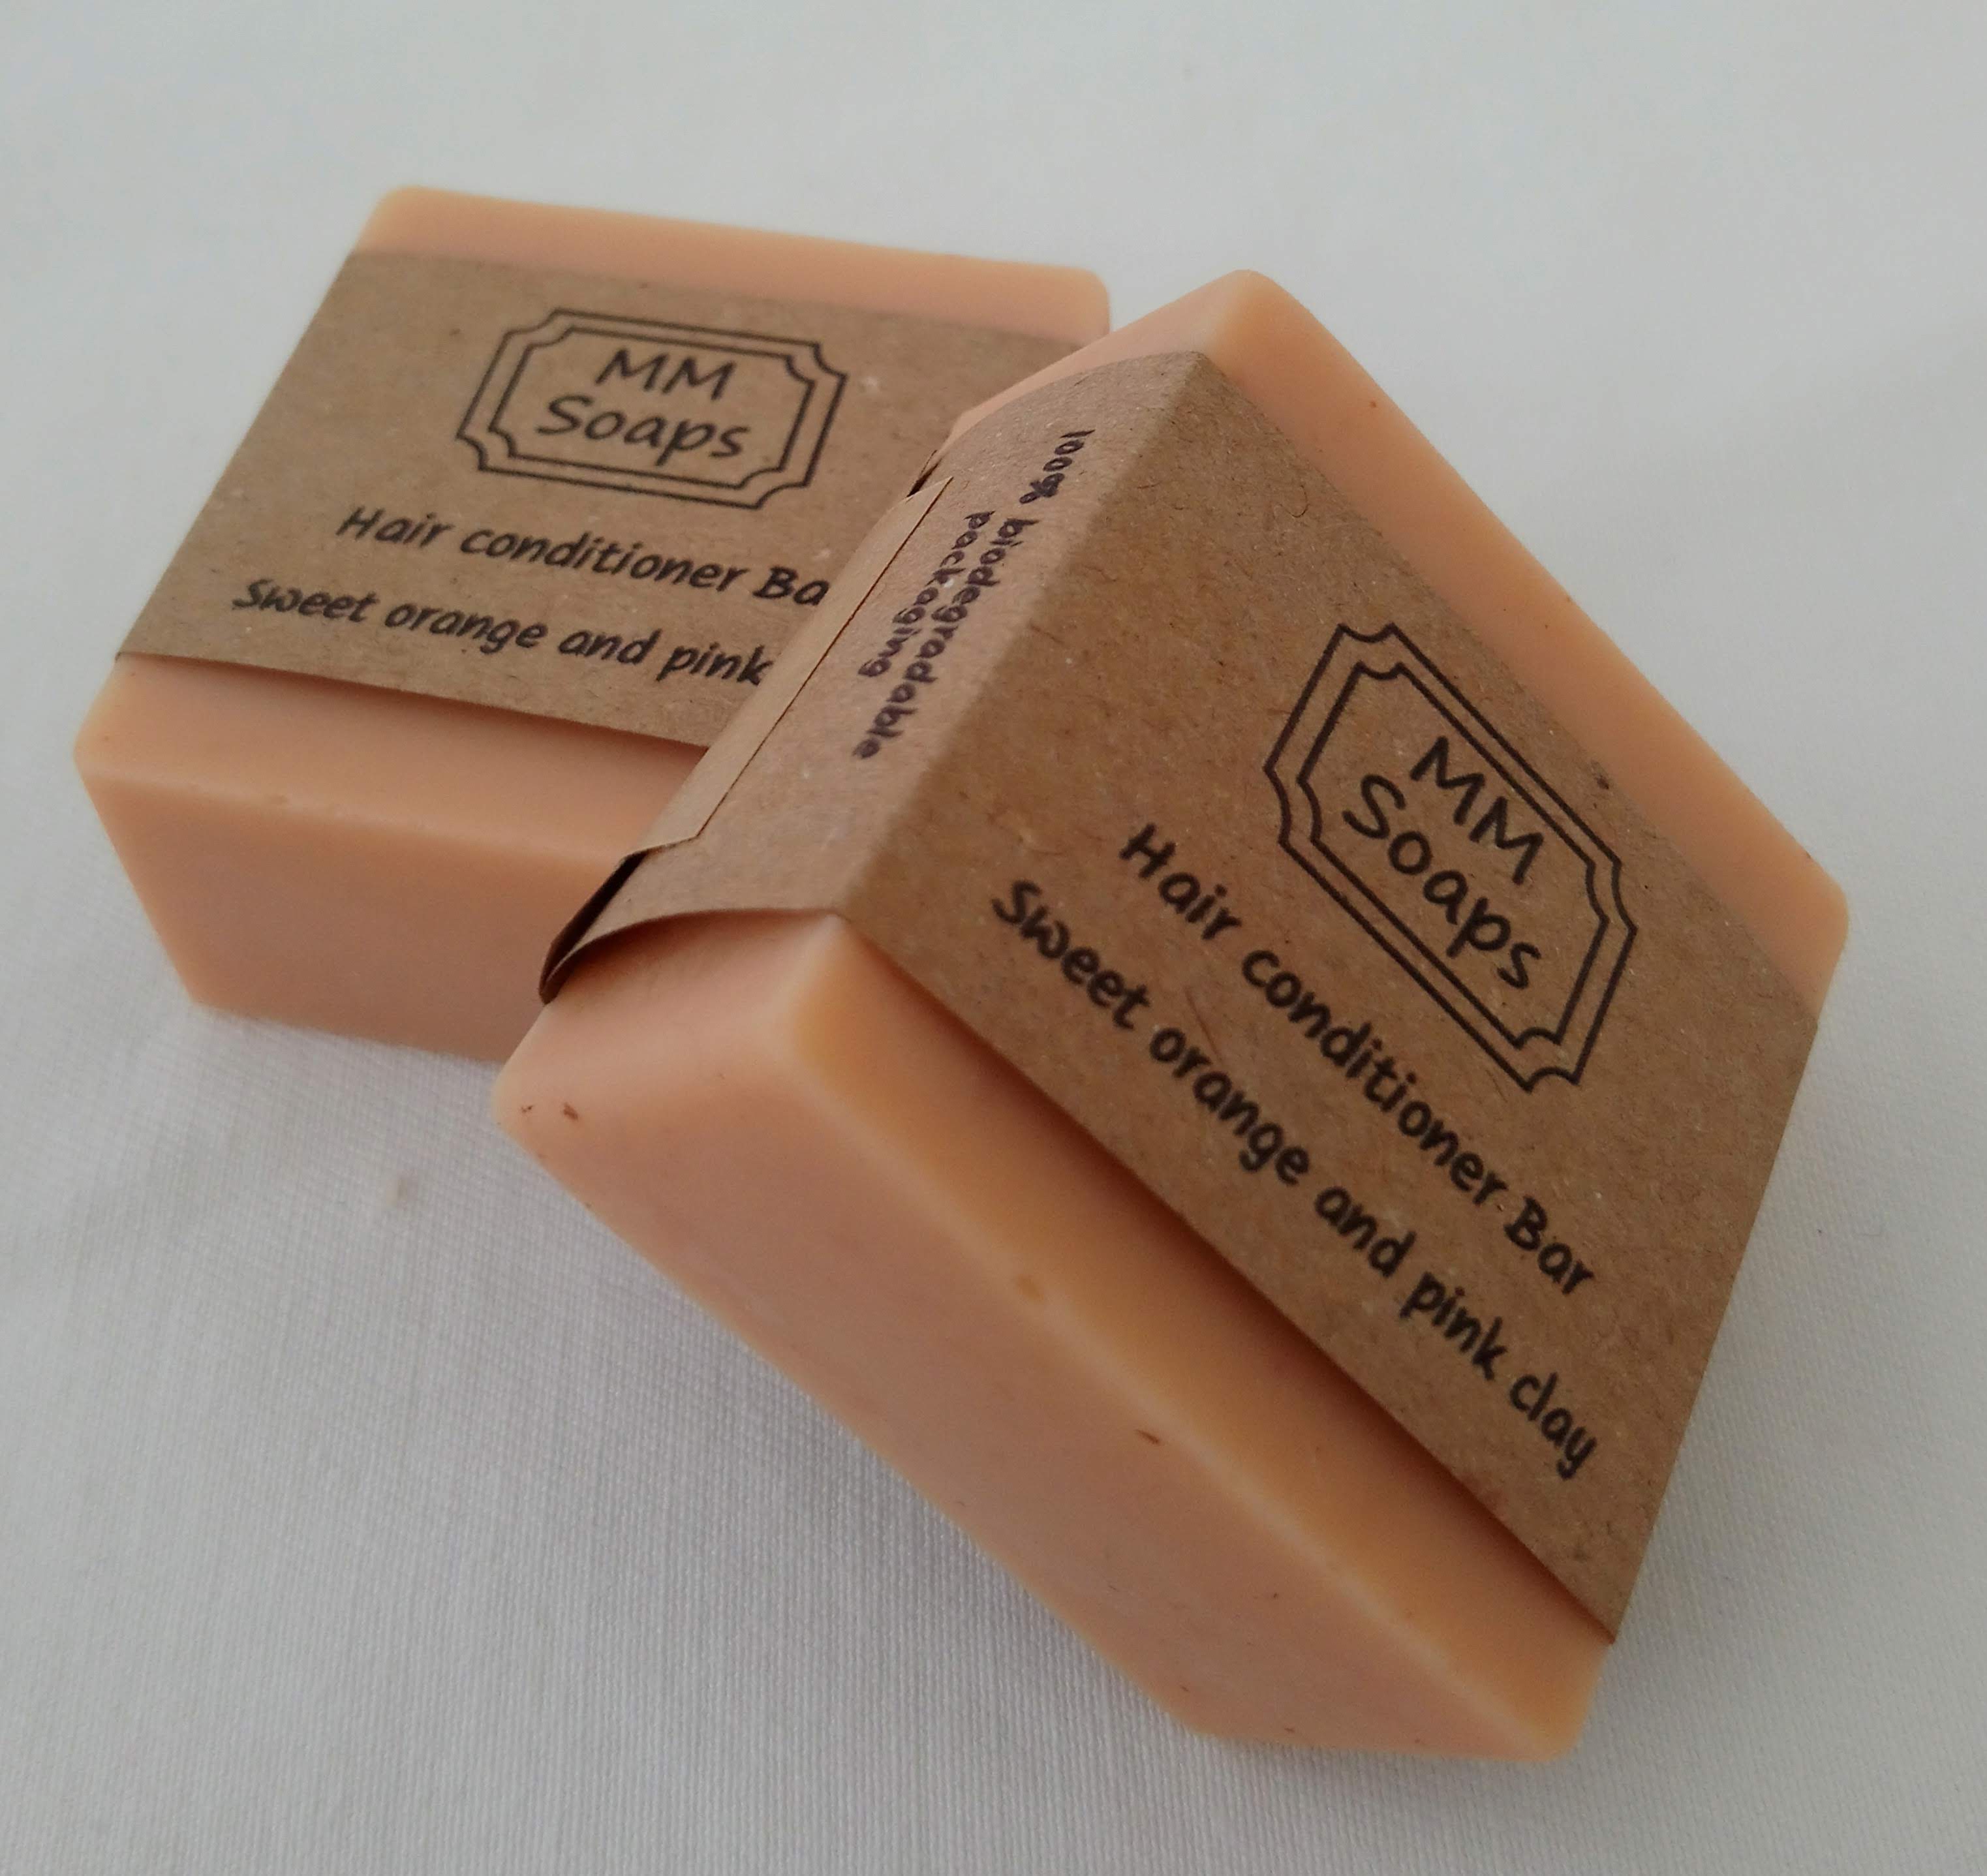 Sweet Orange and Pink Clay Conditioner Bar